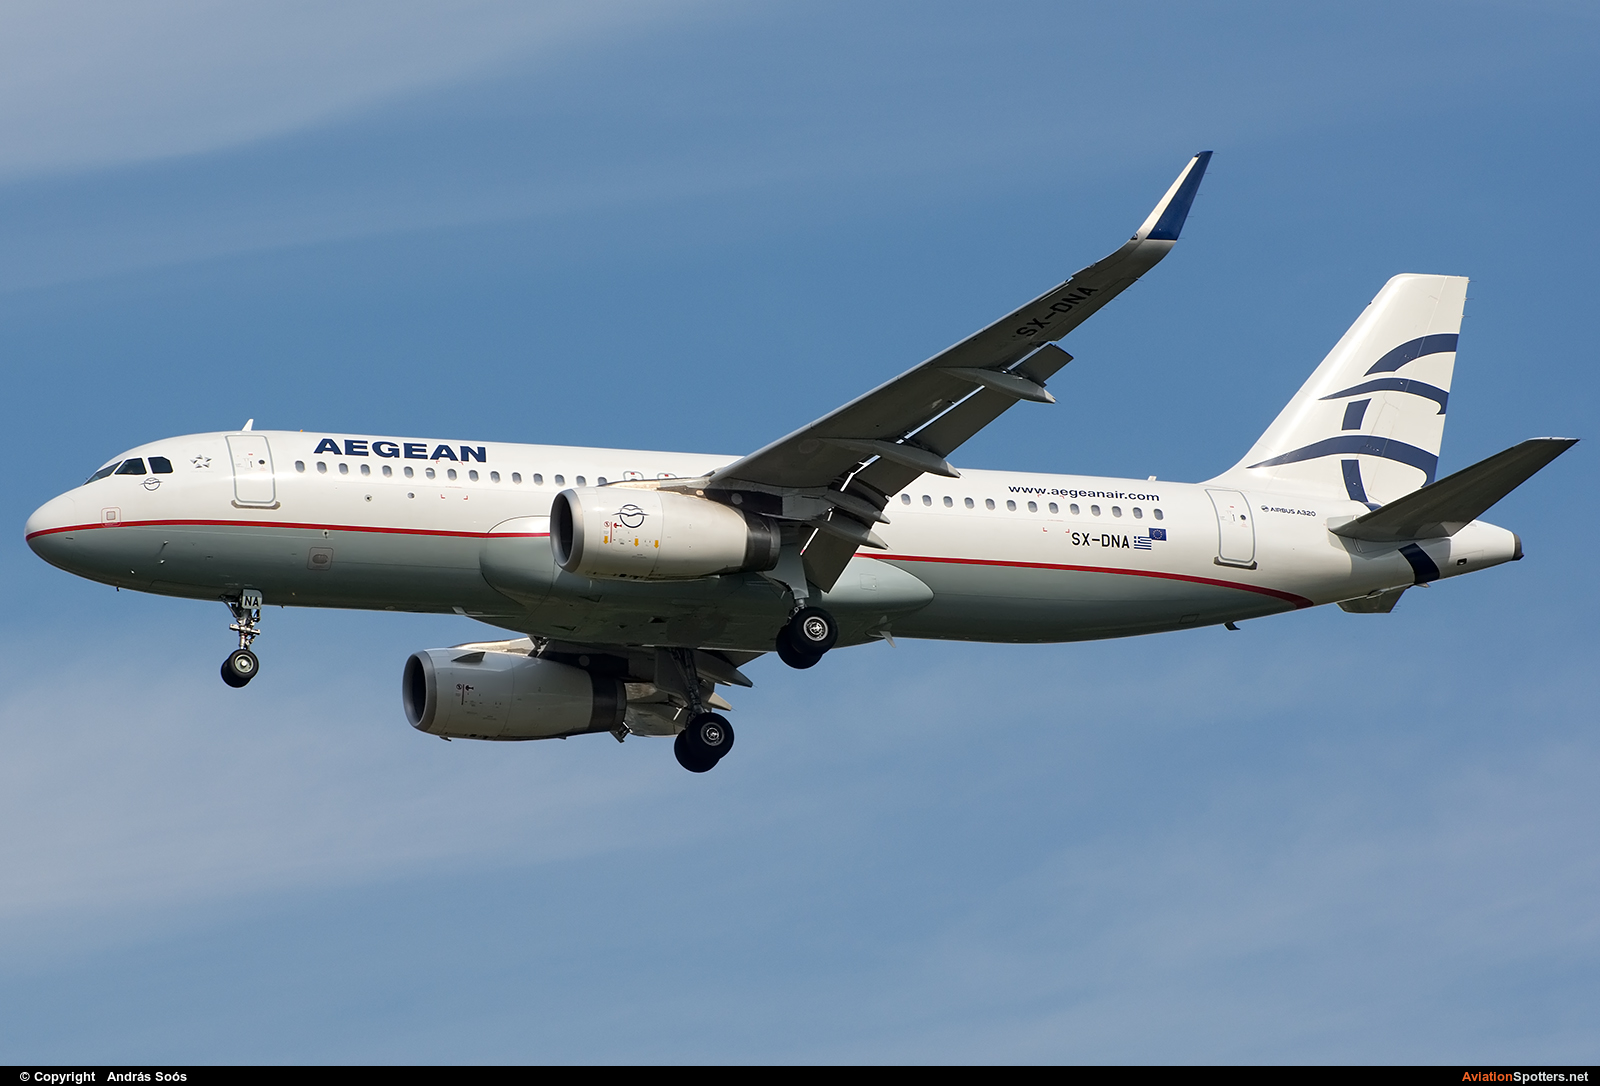 Aegean Airlines  -  A320  (SX-DNA) By András Soós (sas1965)